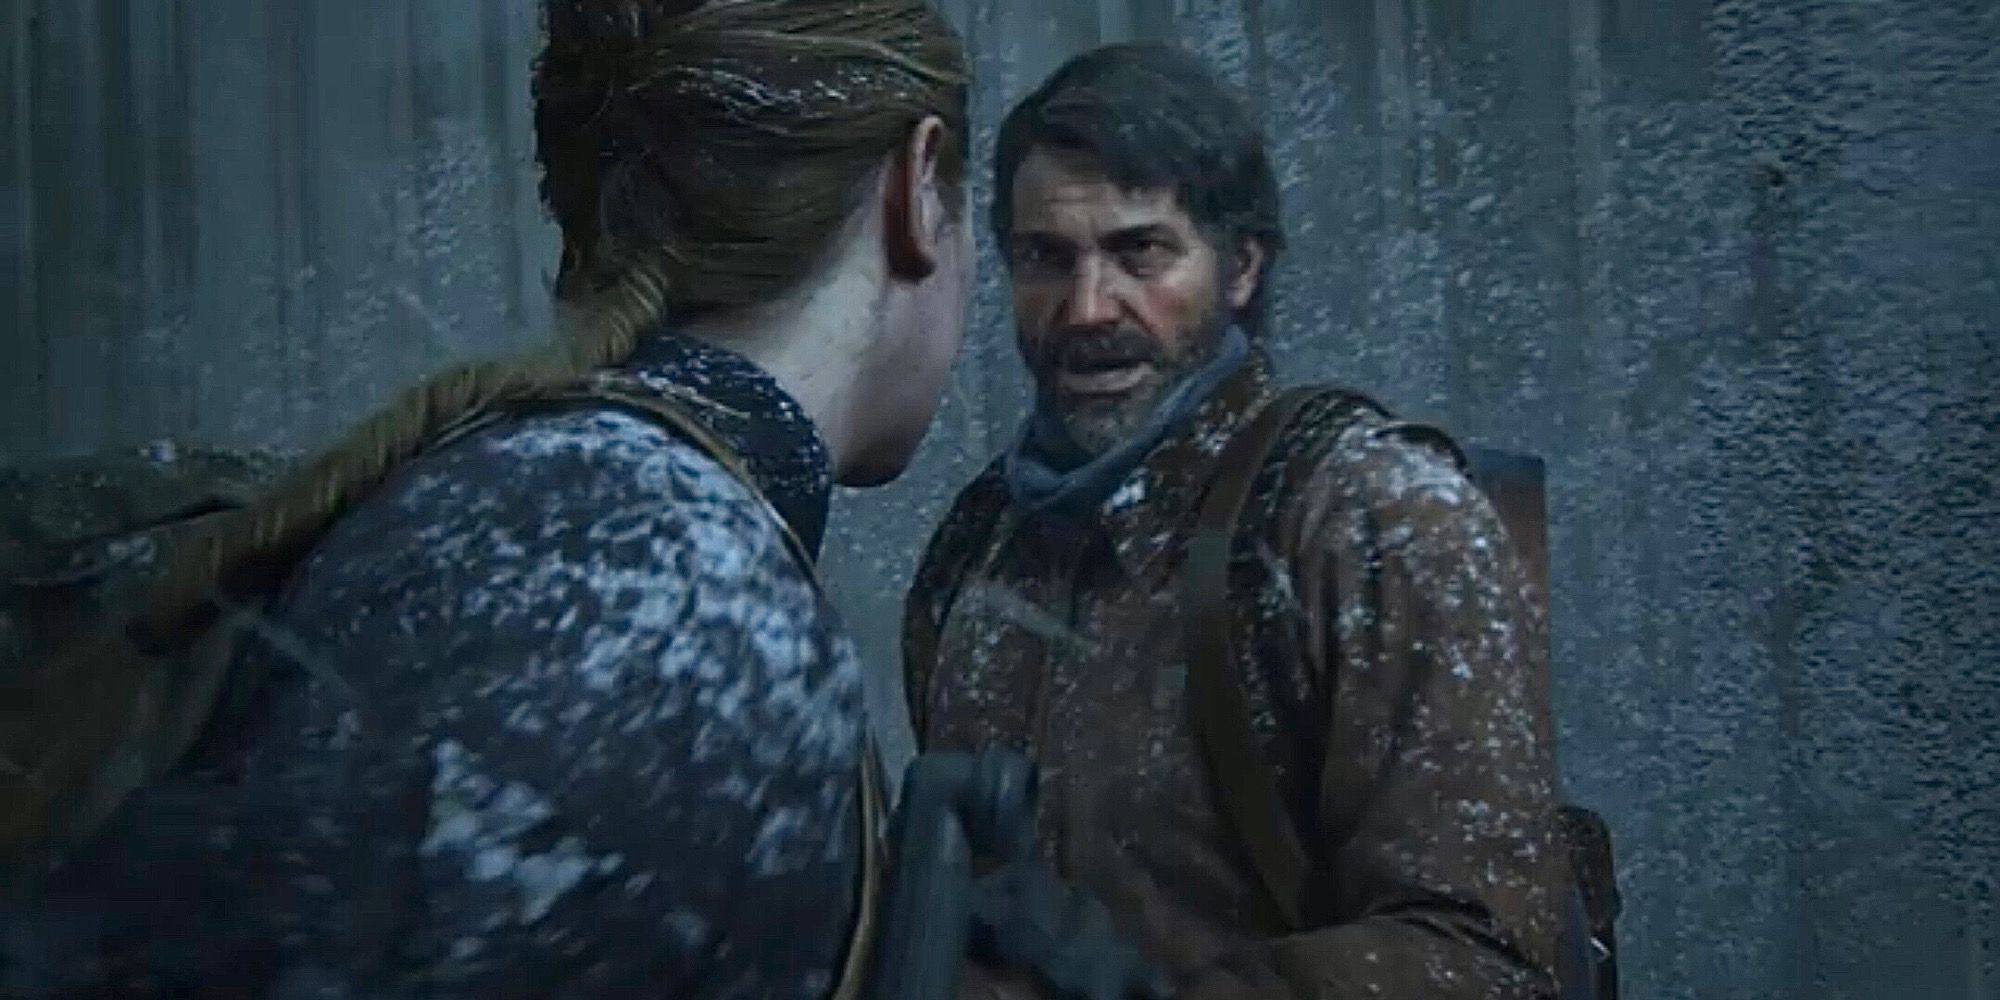 Abby and Joel in the snow in The Last Of Us 2